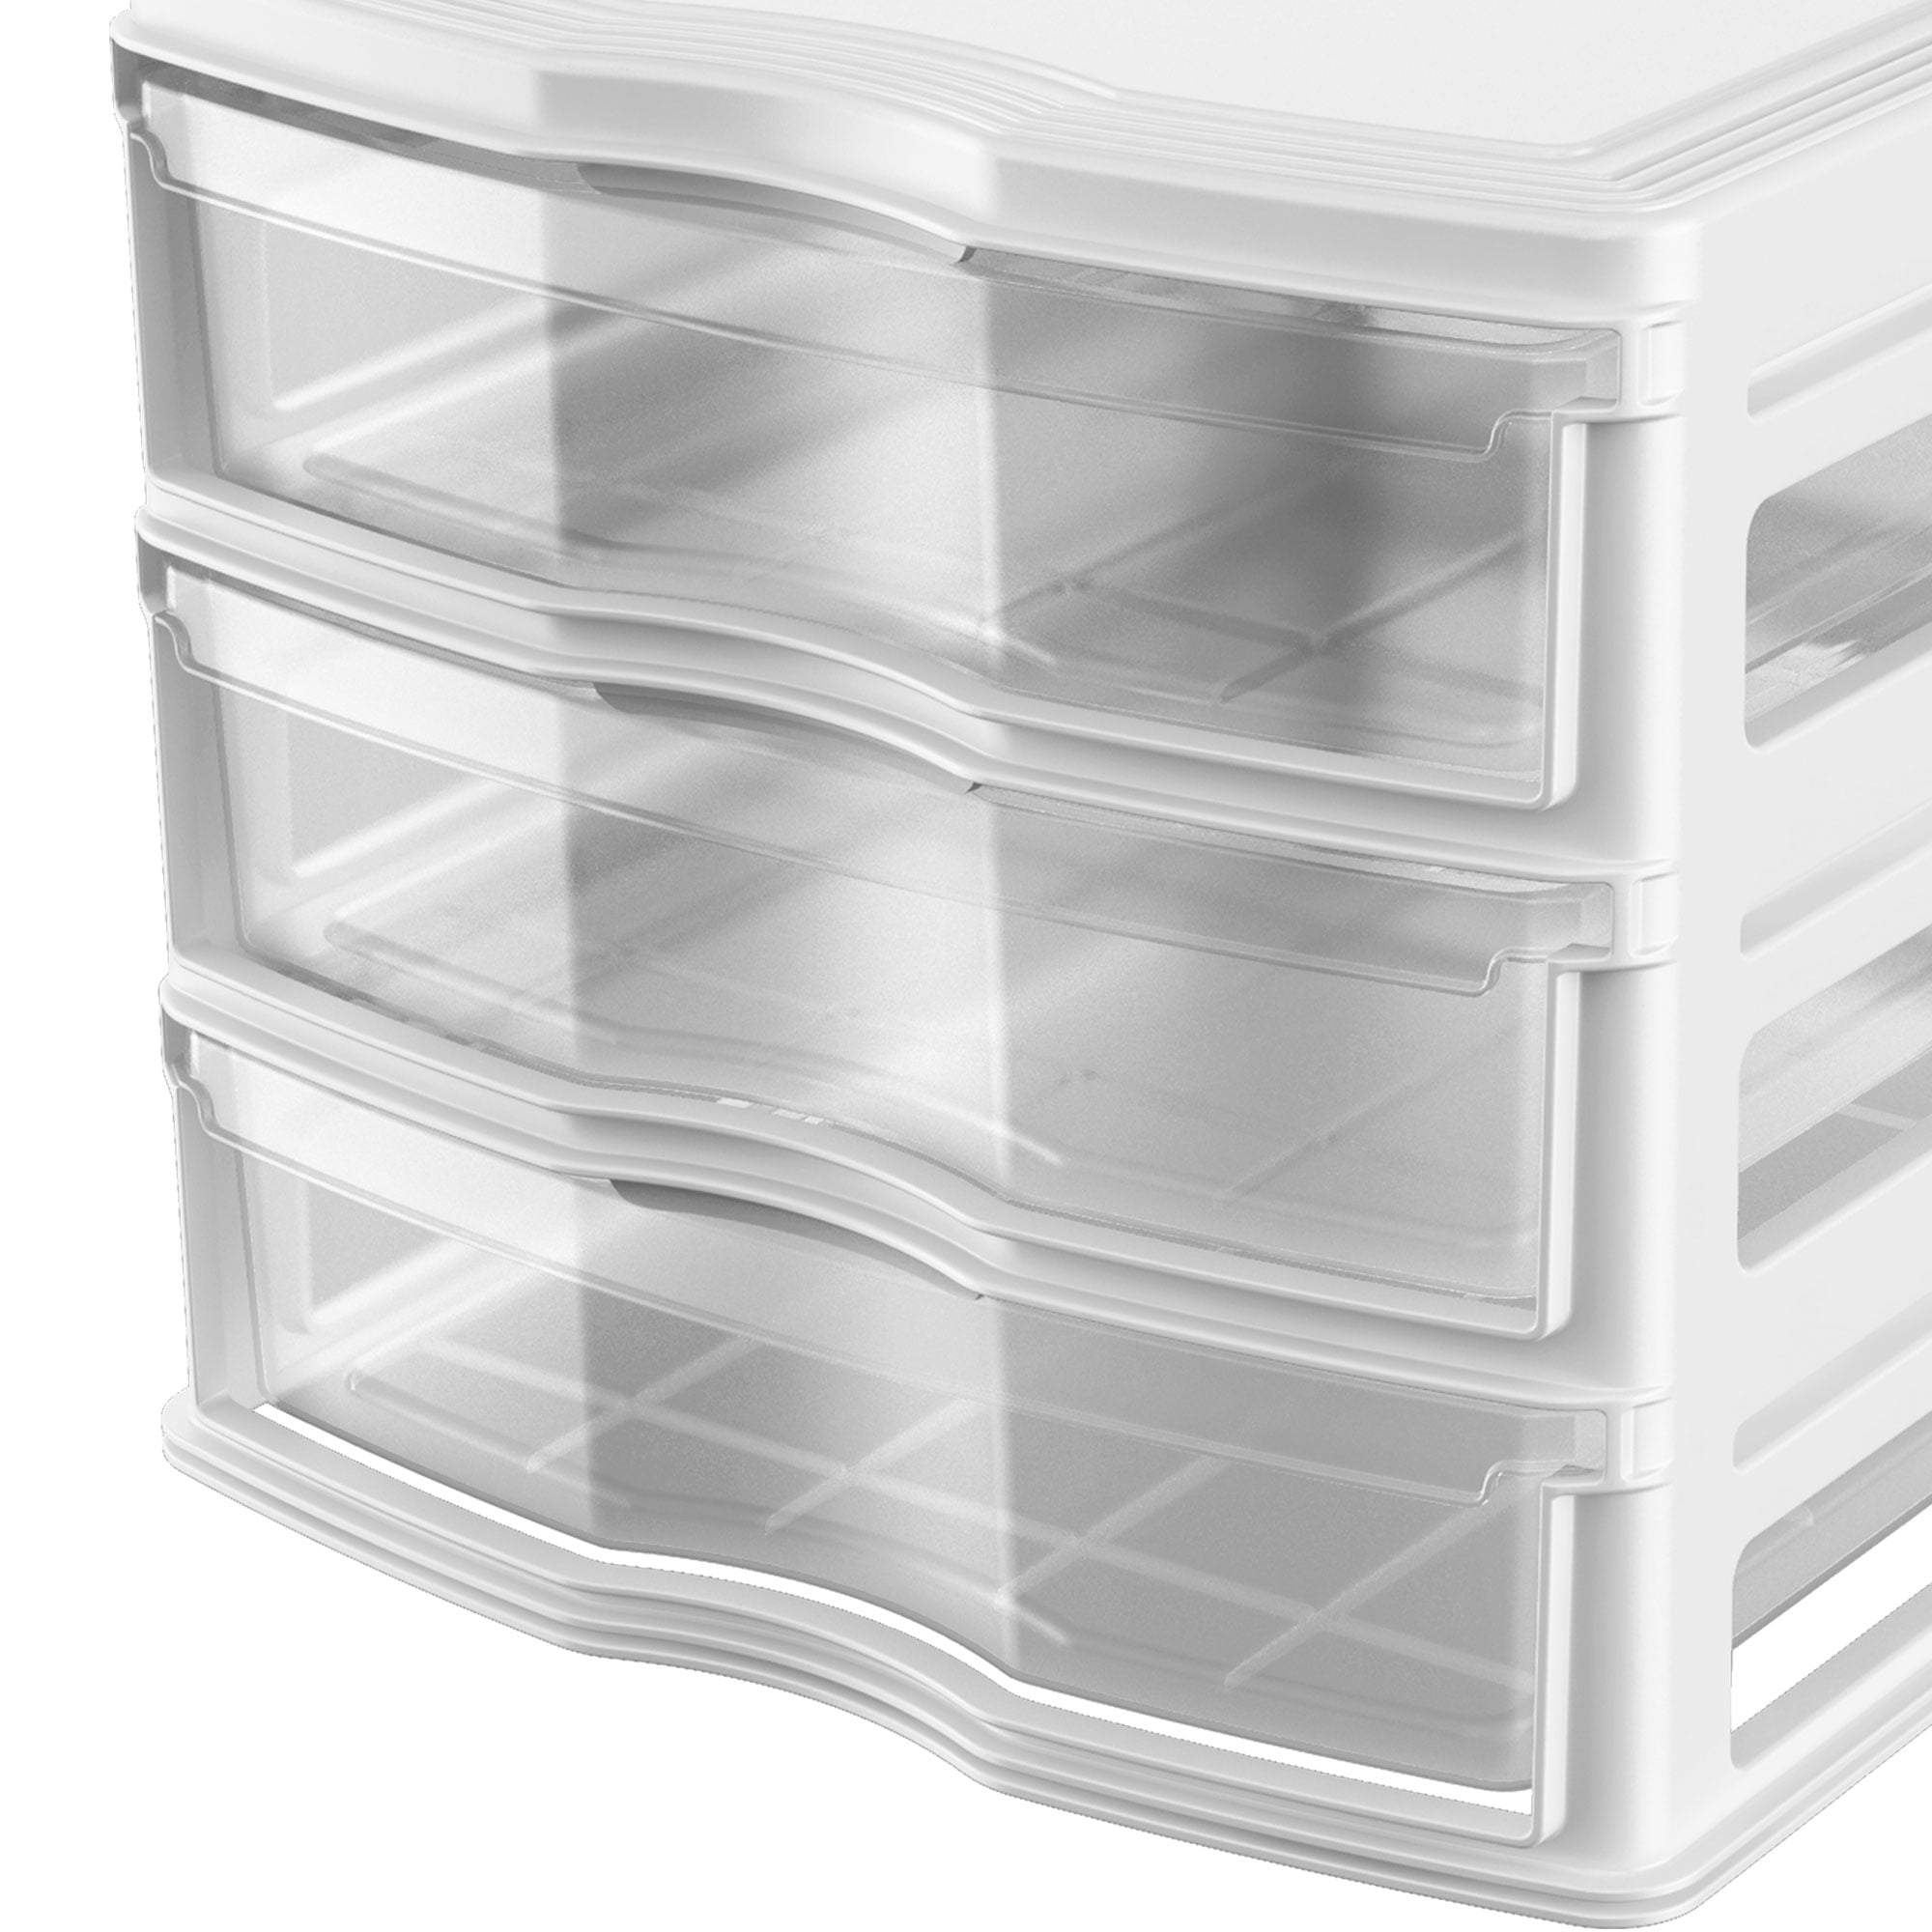 Life Story 3 Drawer Stackable Shelf Organizer Storage Drawers, Black (3  Pack), 1 Piece - King Soopers